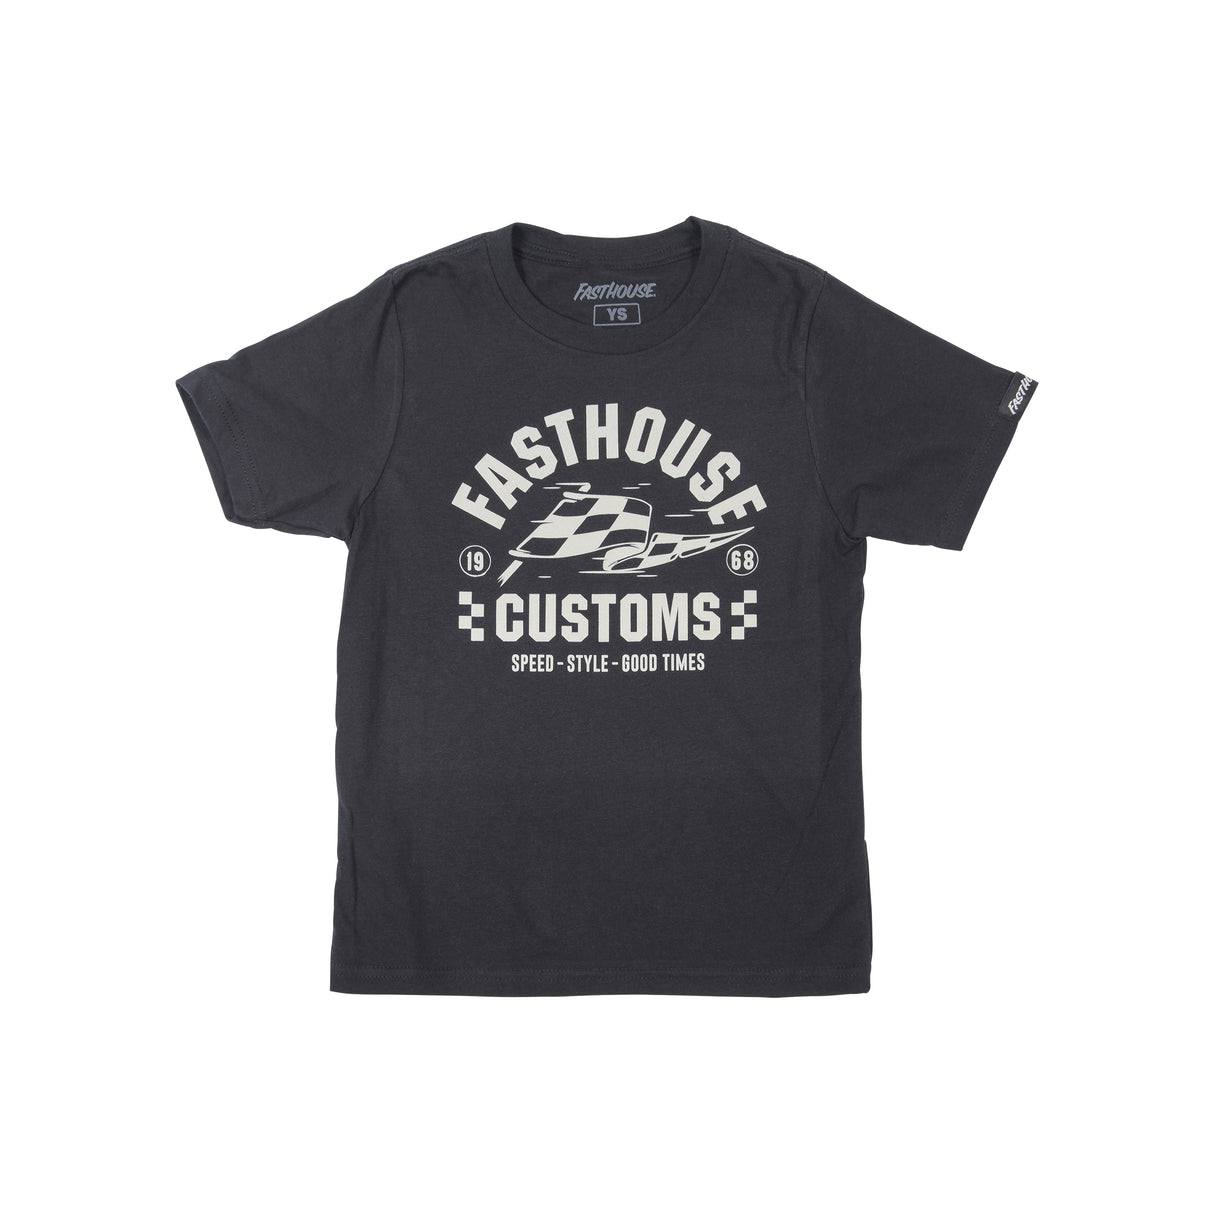 Fasthouse Youth Sprinter Tee